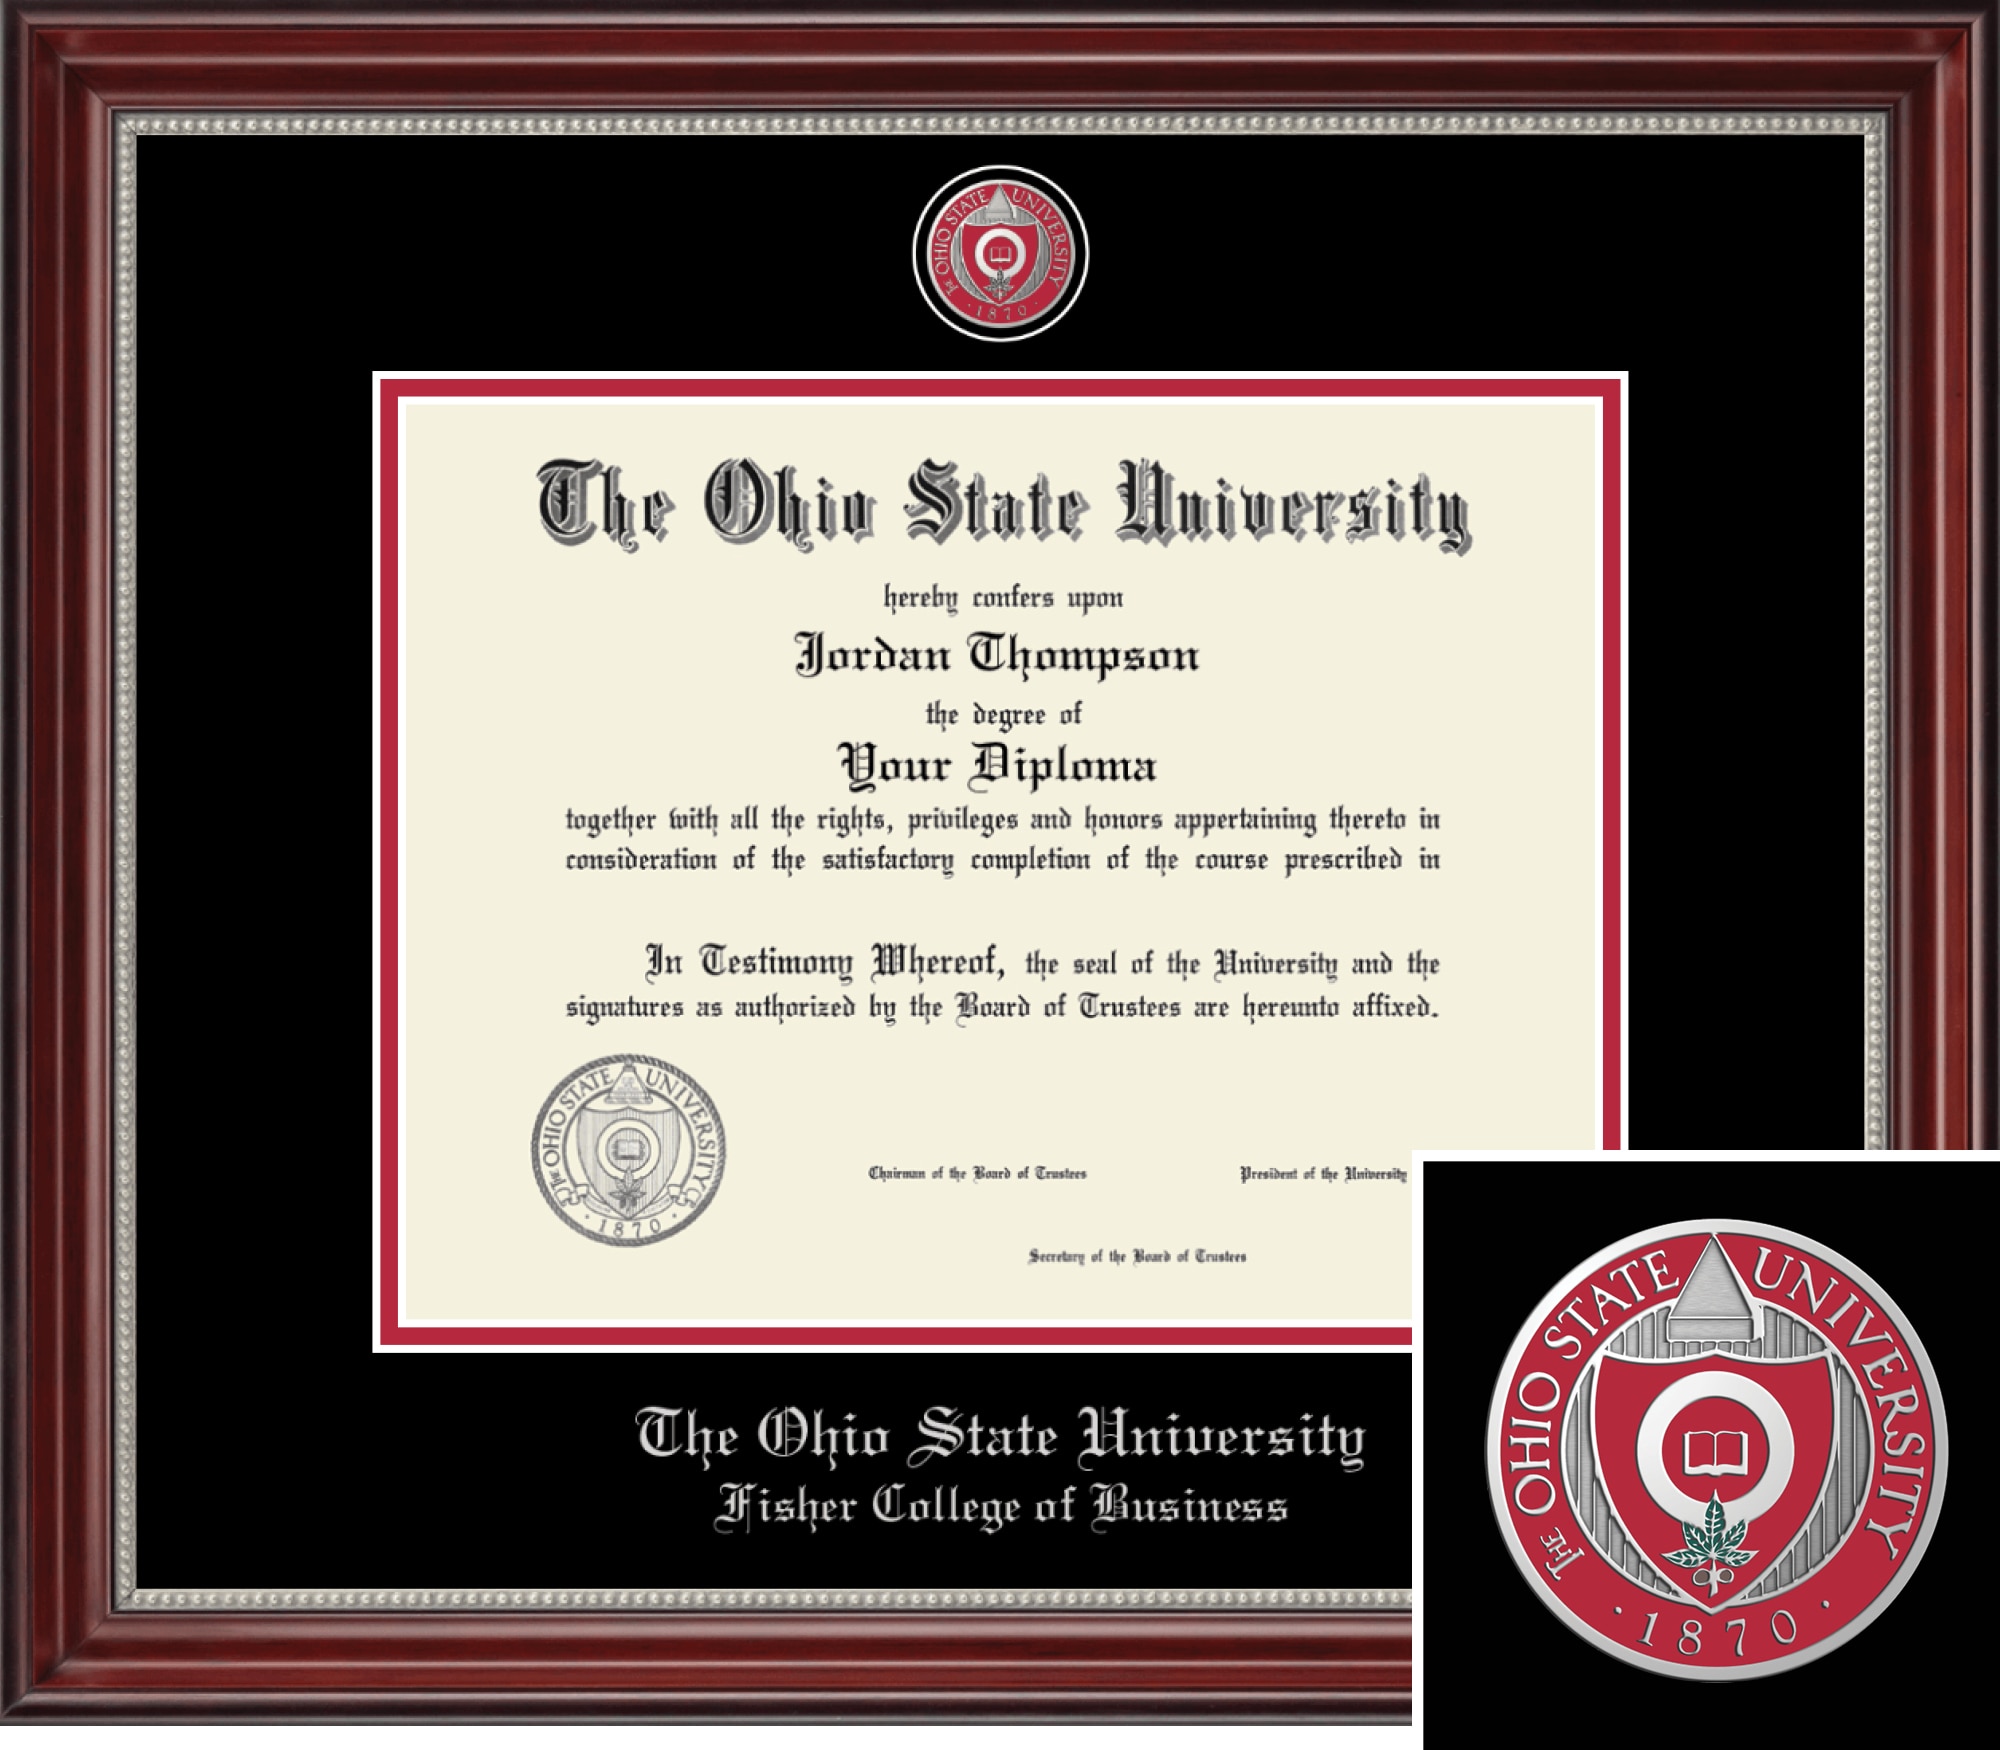 Church Hill Classics 8.5" x 11" Masterpiece Cherry Fisher College of Business Diploma Frame